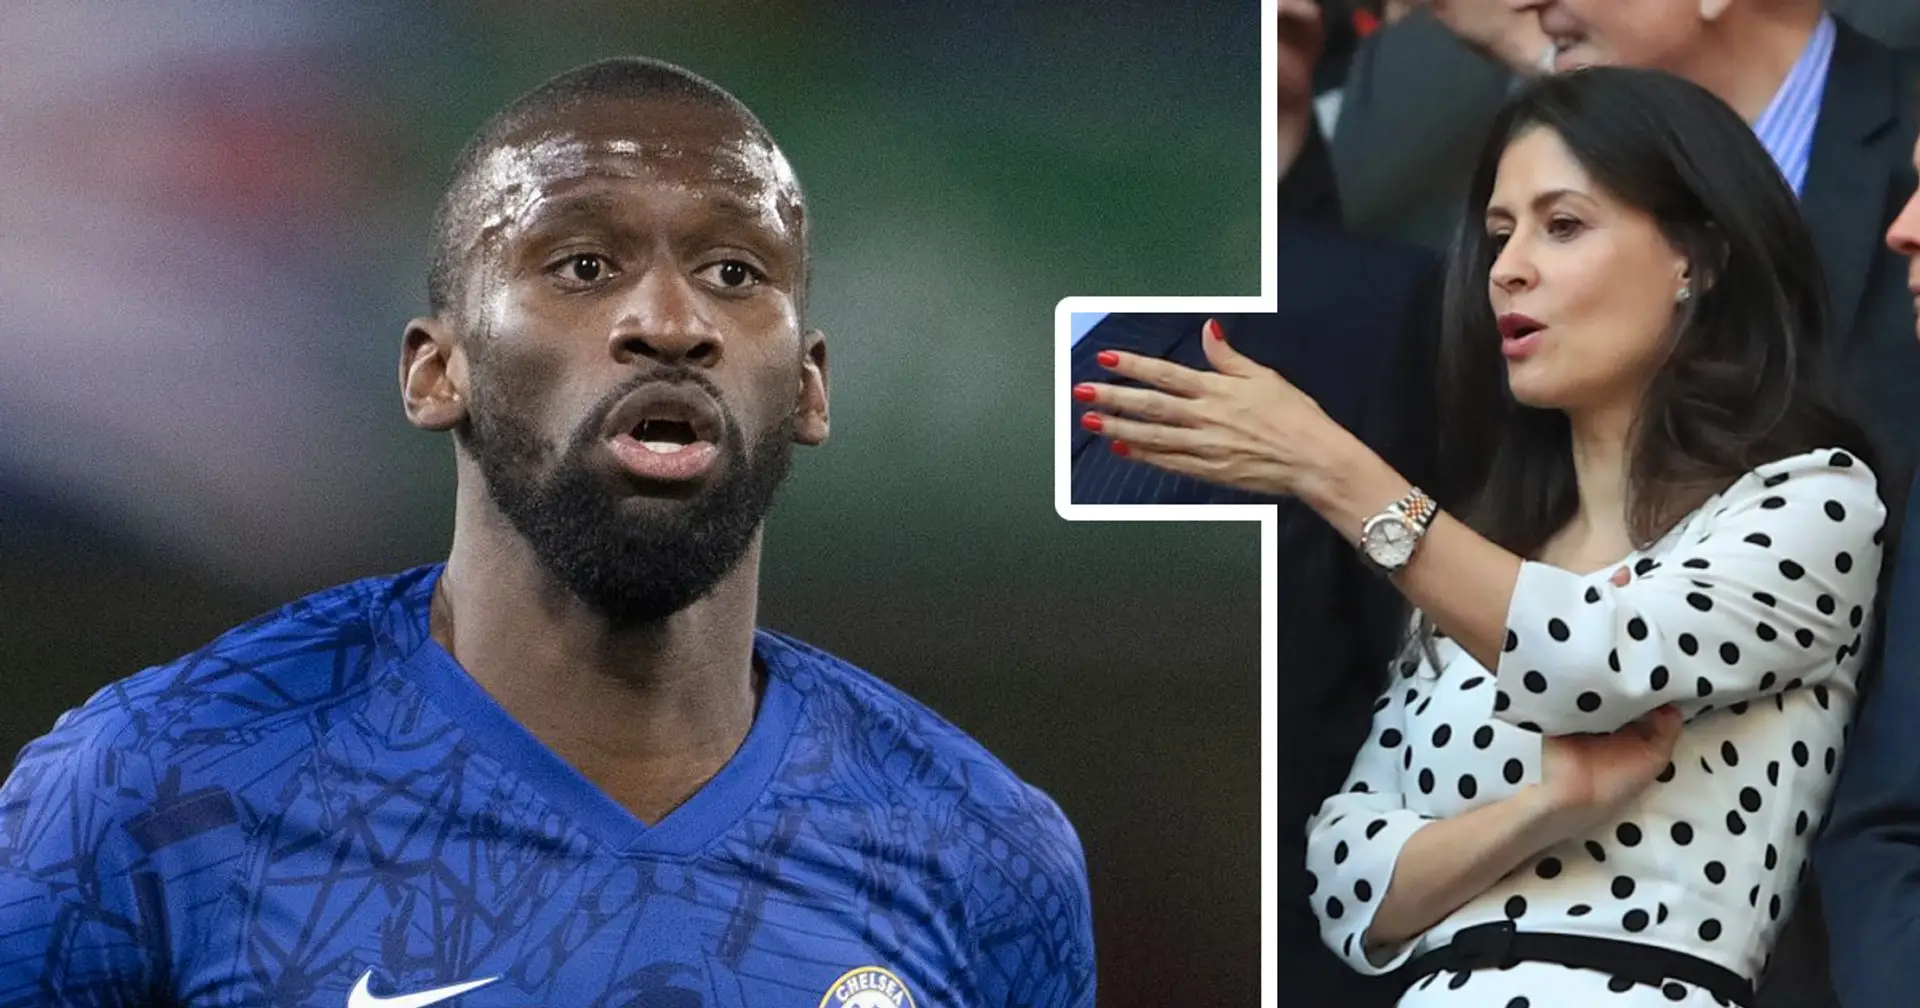 Chelsea make 'disrespectful' Rudiger contract offer & 6 more under-radar stories you could have missed